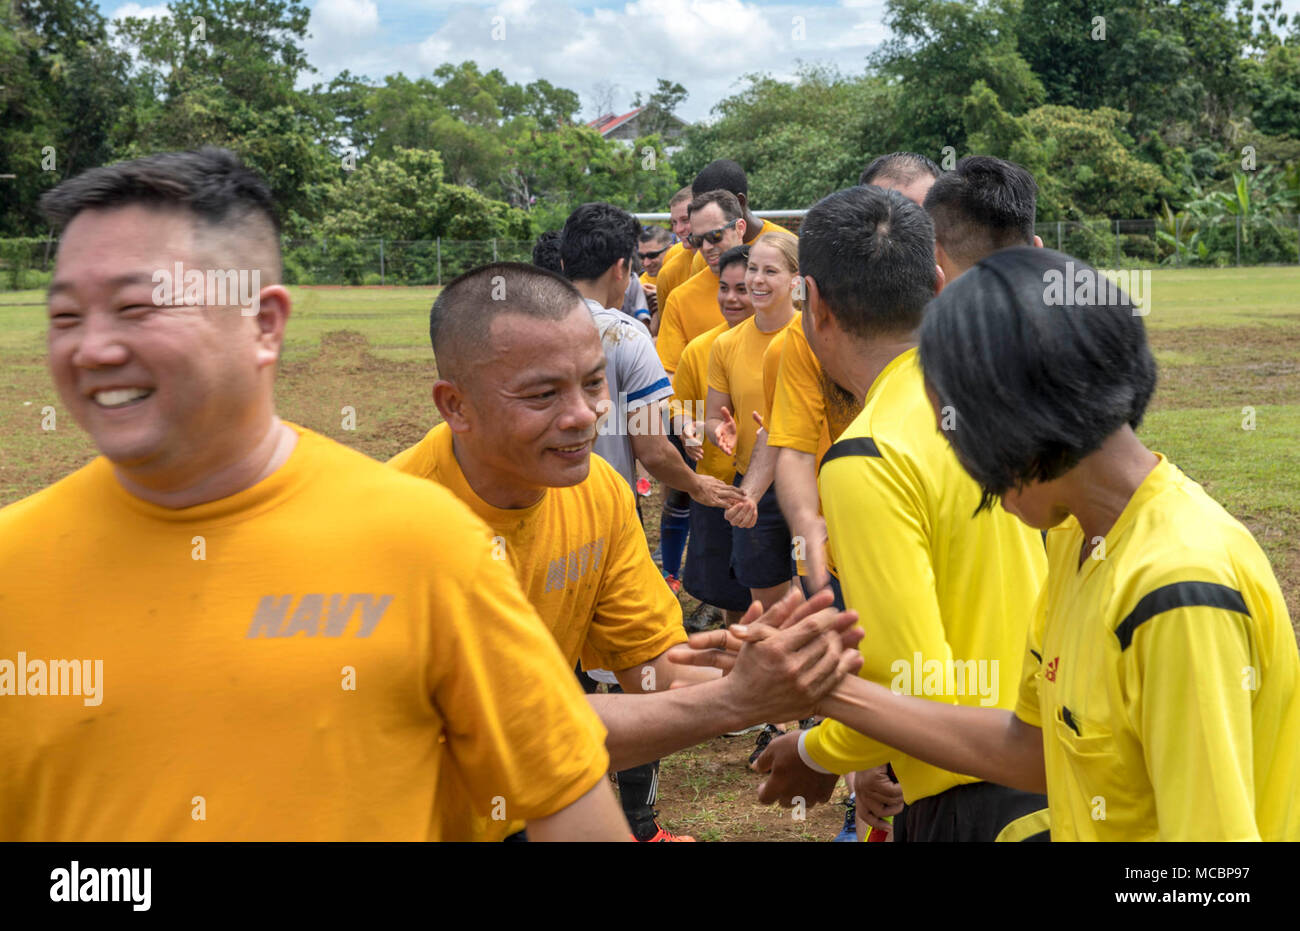 Indonesia (March 30, 2018) Sailors assigned to Military Sealift Command hospital ship USNS Mercy (T-AH 19) and students who attend the University of Bengkulu shake hands after a soccer game during a community relations event at the University of Bengkulu soccer field. Mercy is currently deployed in support of Pacific Partnership 2018 (PP18). PP18’s mission is to work collectively with host and partner nations to enhance regional interoperability and disaster response capabilities, increase stability and security in the region, and foster new and enduring friendships across the Indo-Pacific Reg Stock Photo